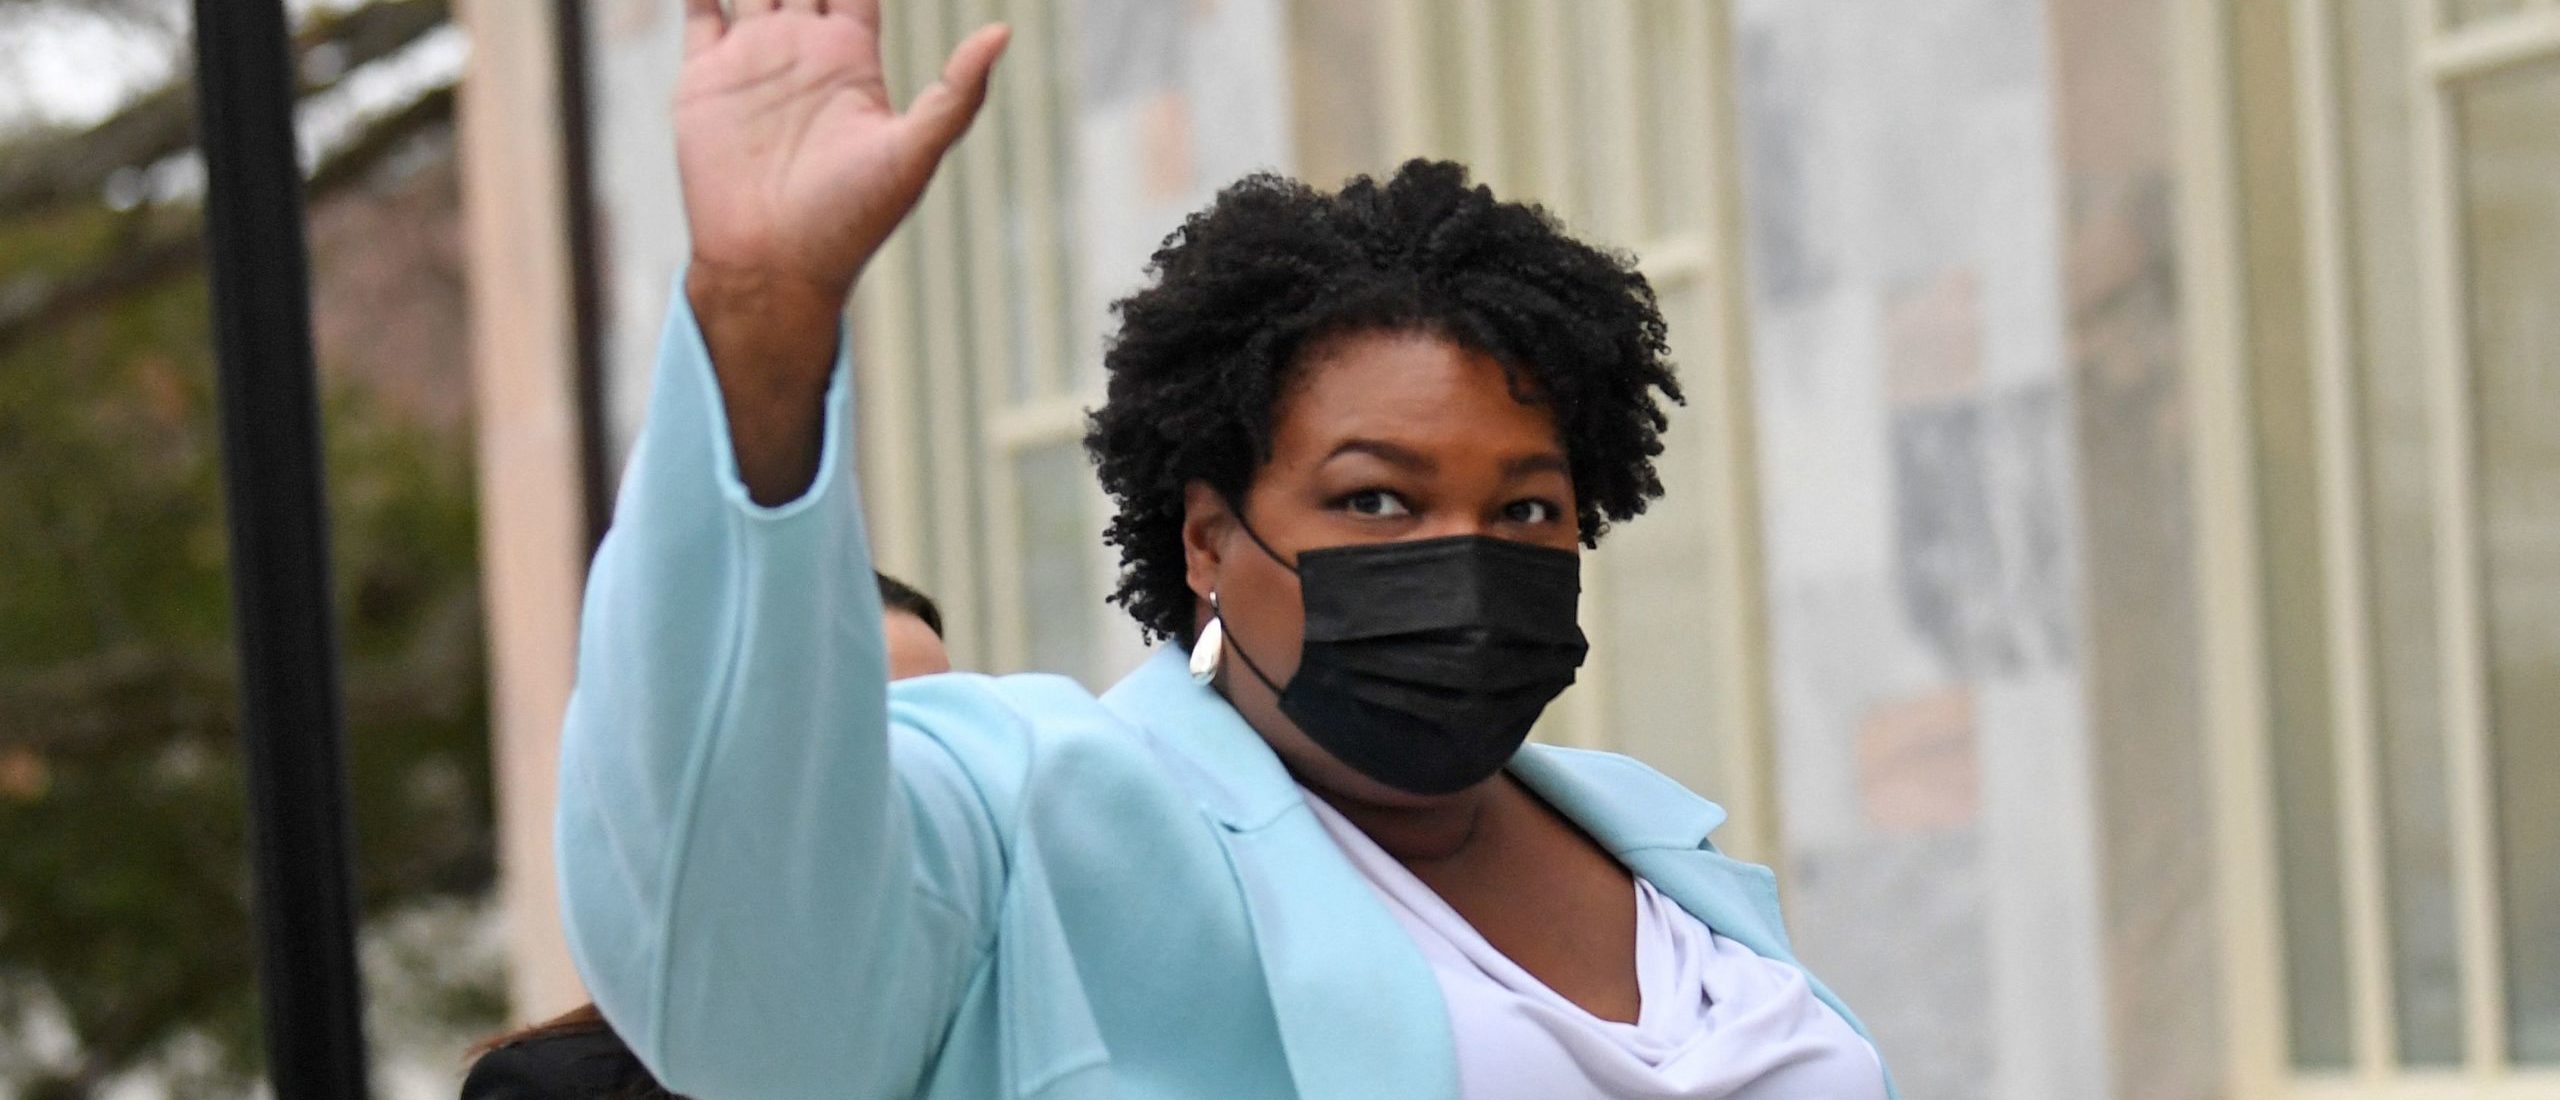 US politician and voting rights activist Stacey Abrams arrives to meet with US President Joe Biden at Emory University in Atlanta, Georgia on March 19, 2021. (Photo by Eric BARADAT / AFP) (Photo by ERIC BARADAT/AFP via Getty Images)